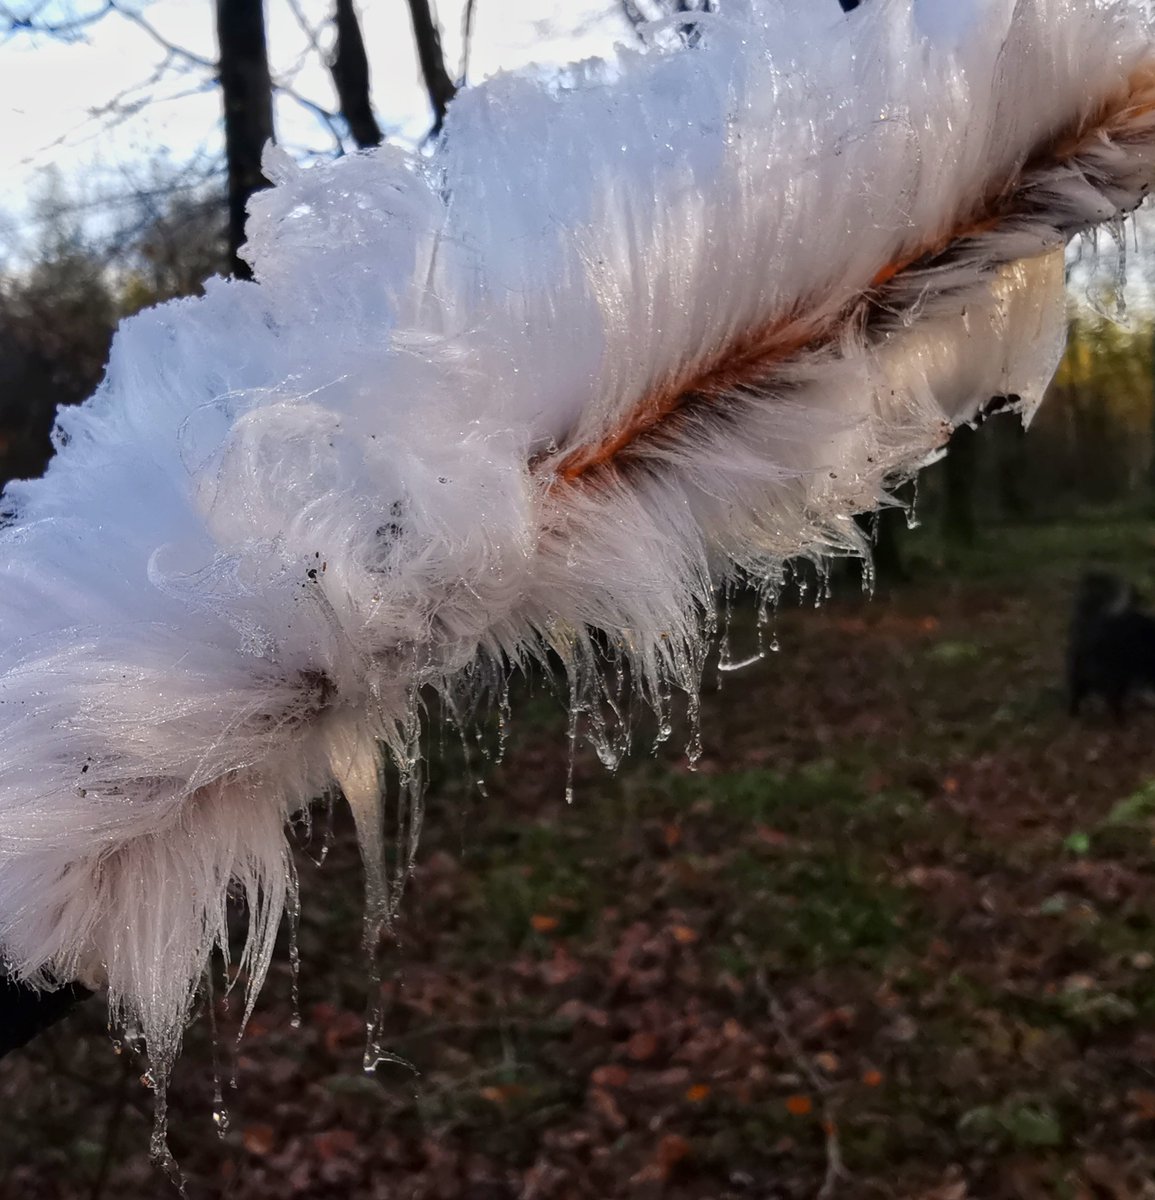 An absolute treat in the woods this morning: amazing beauty of feather frost/frost flowers! #natureconnection #woodlandwellbeing